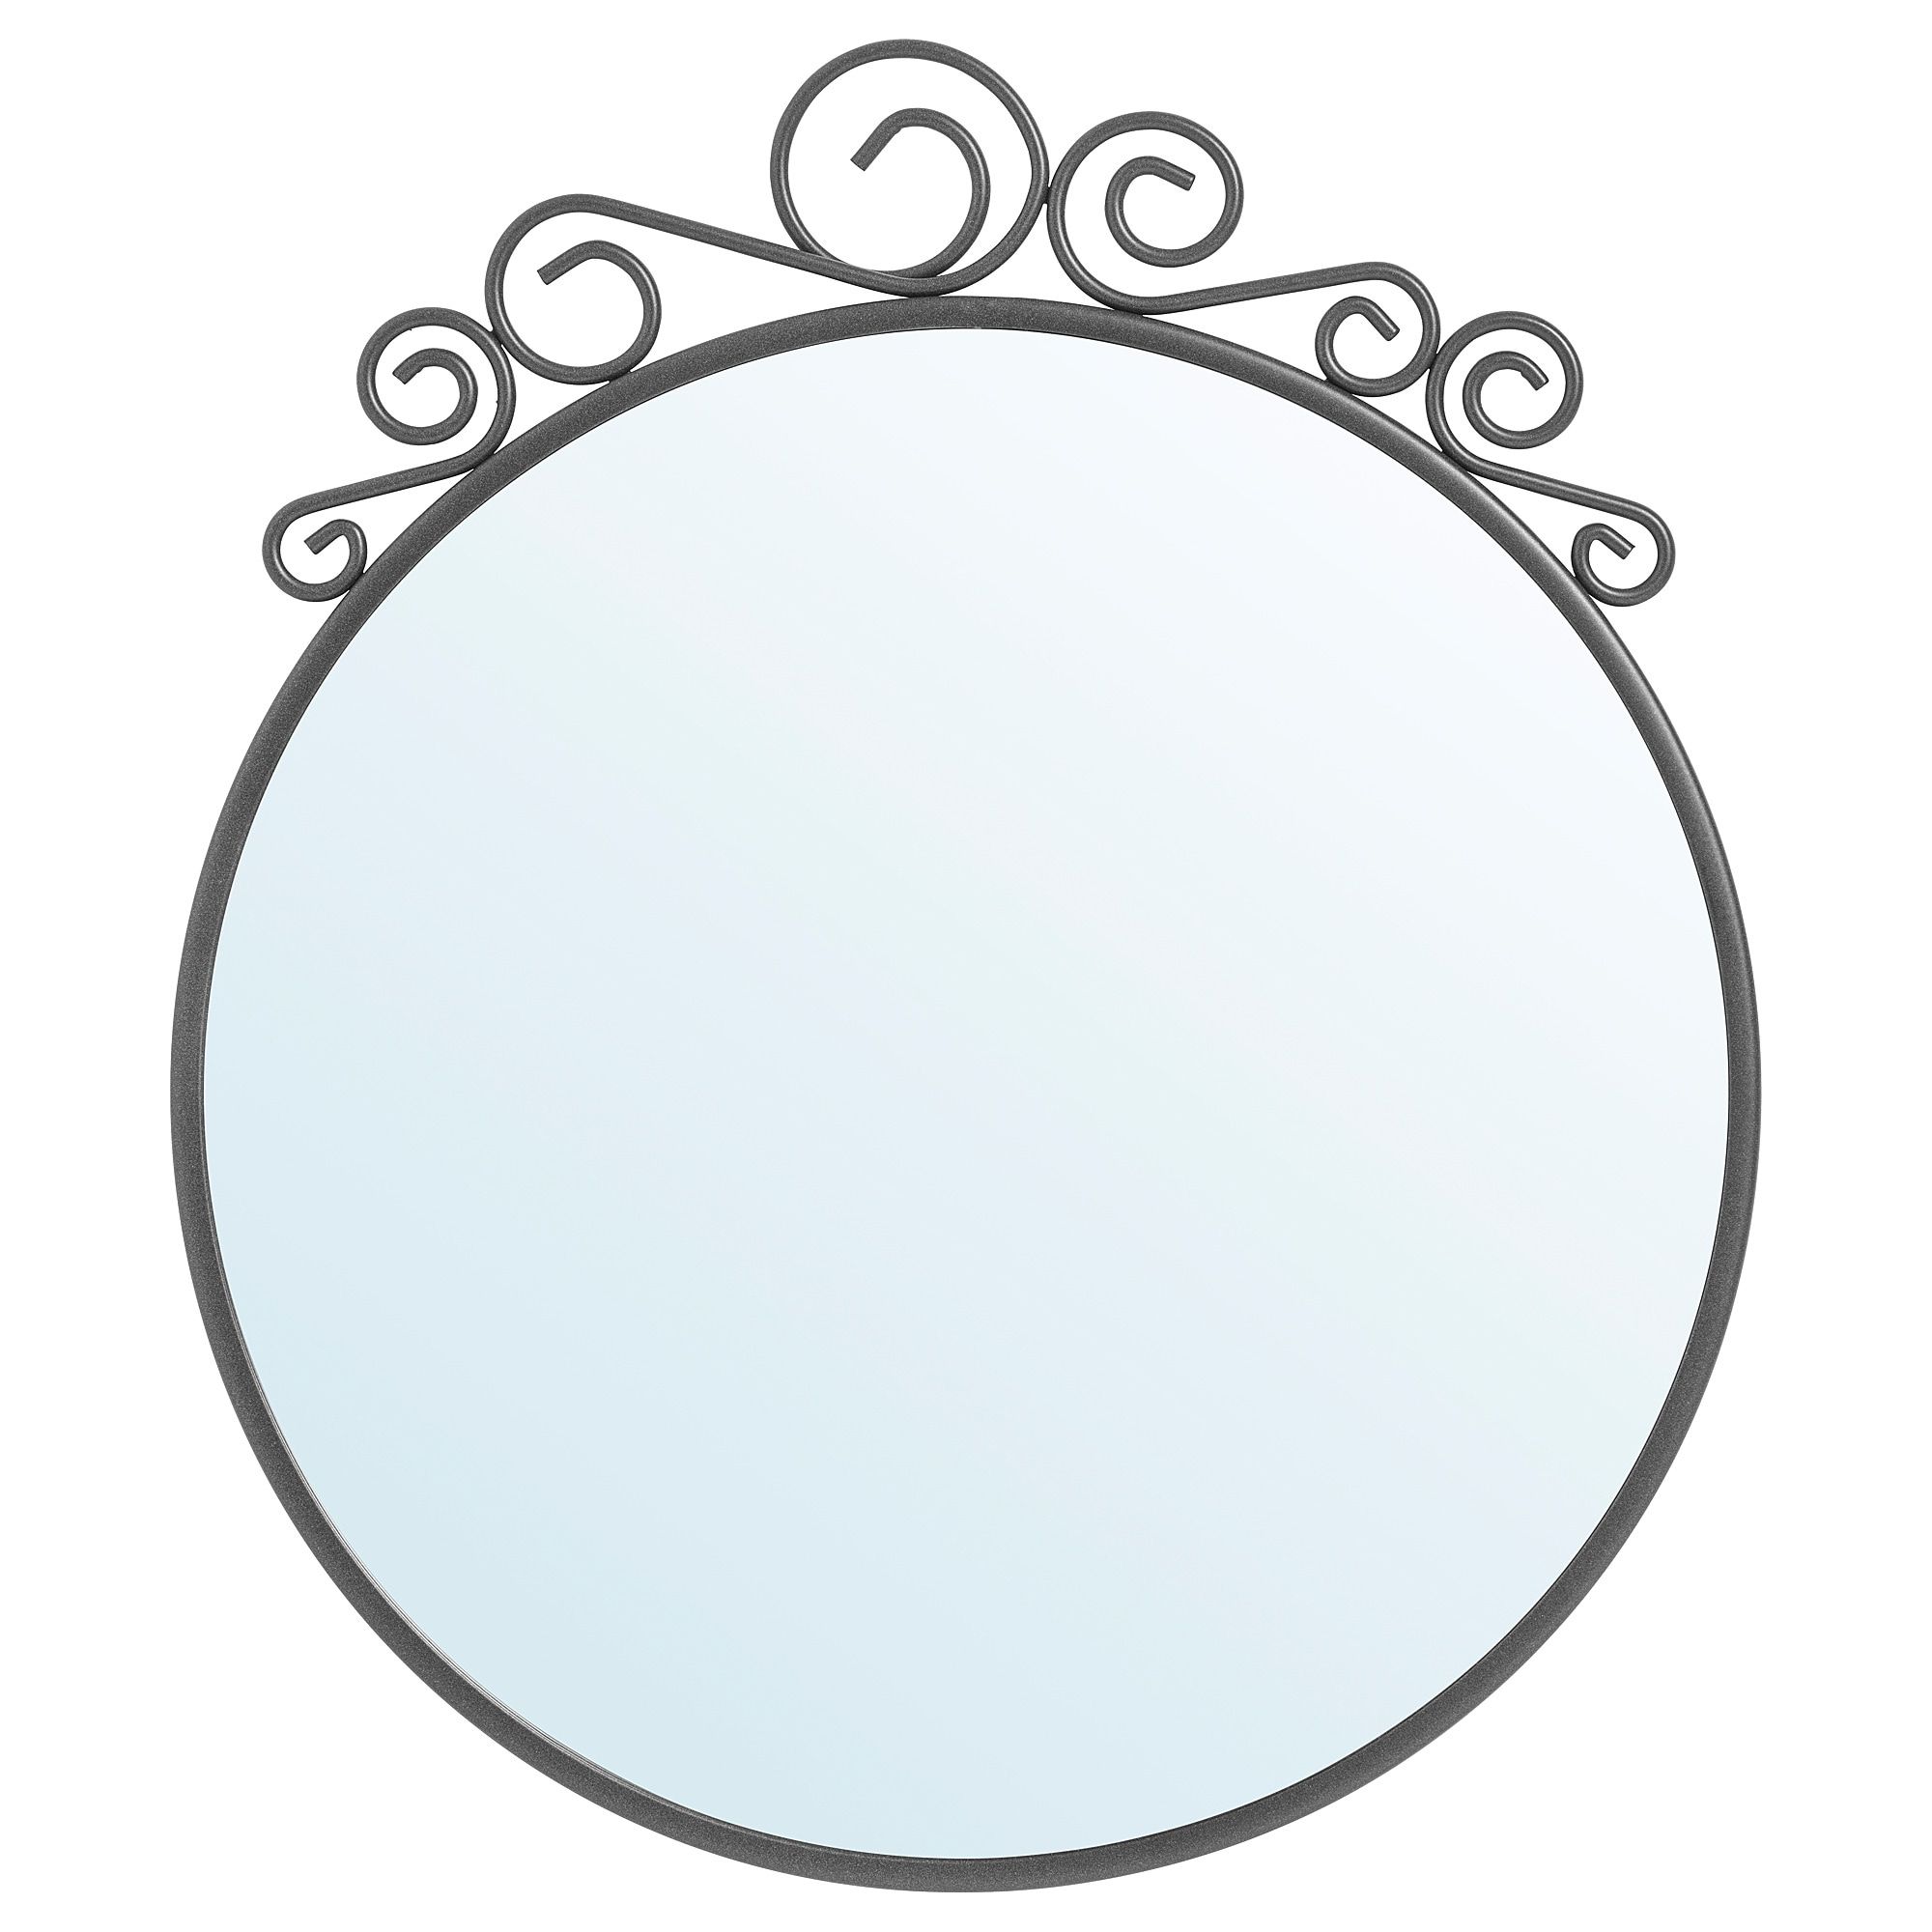 Ekne Mirror Within Well Liked Ikea Oval Wall Mirrors (View 6 of 20)